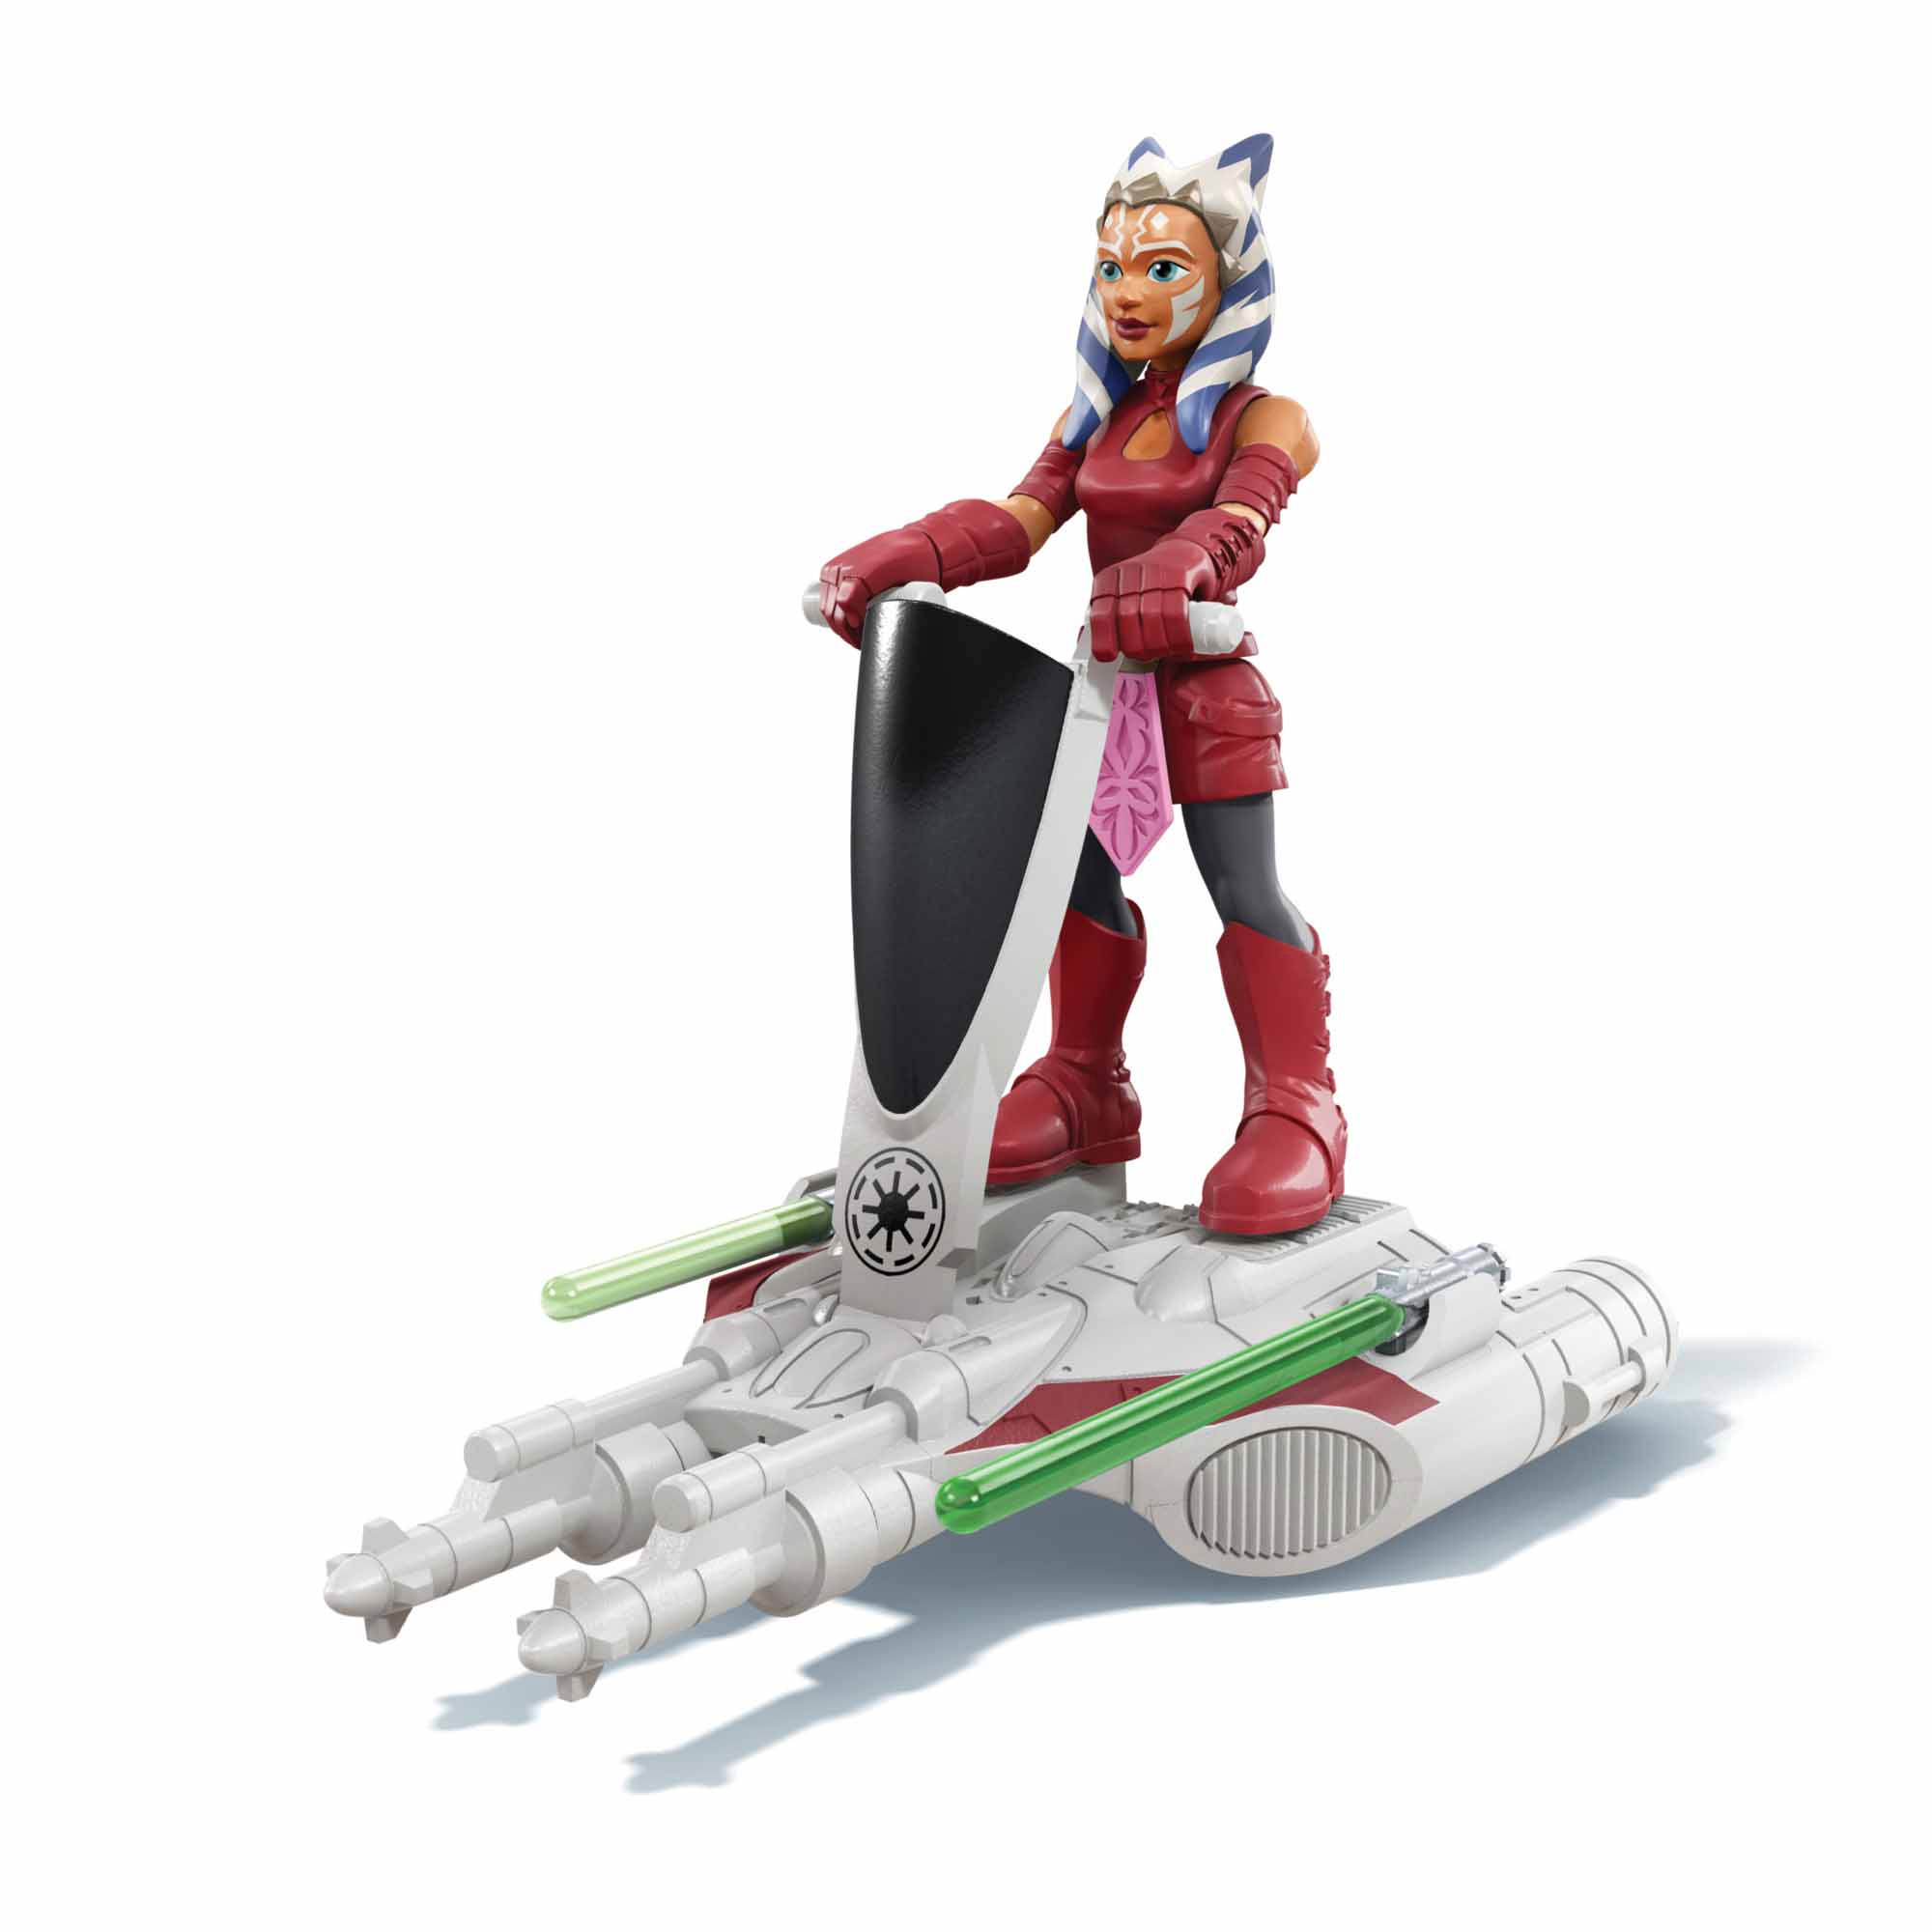 Star Wars Mission Fleet Gear Class Ahsoka Tano Aquatic Attack 2.5-Inch-Scale Figure and Vehicle, for Kids Ages 4 and Up